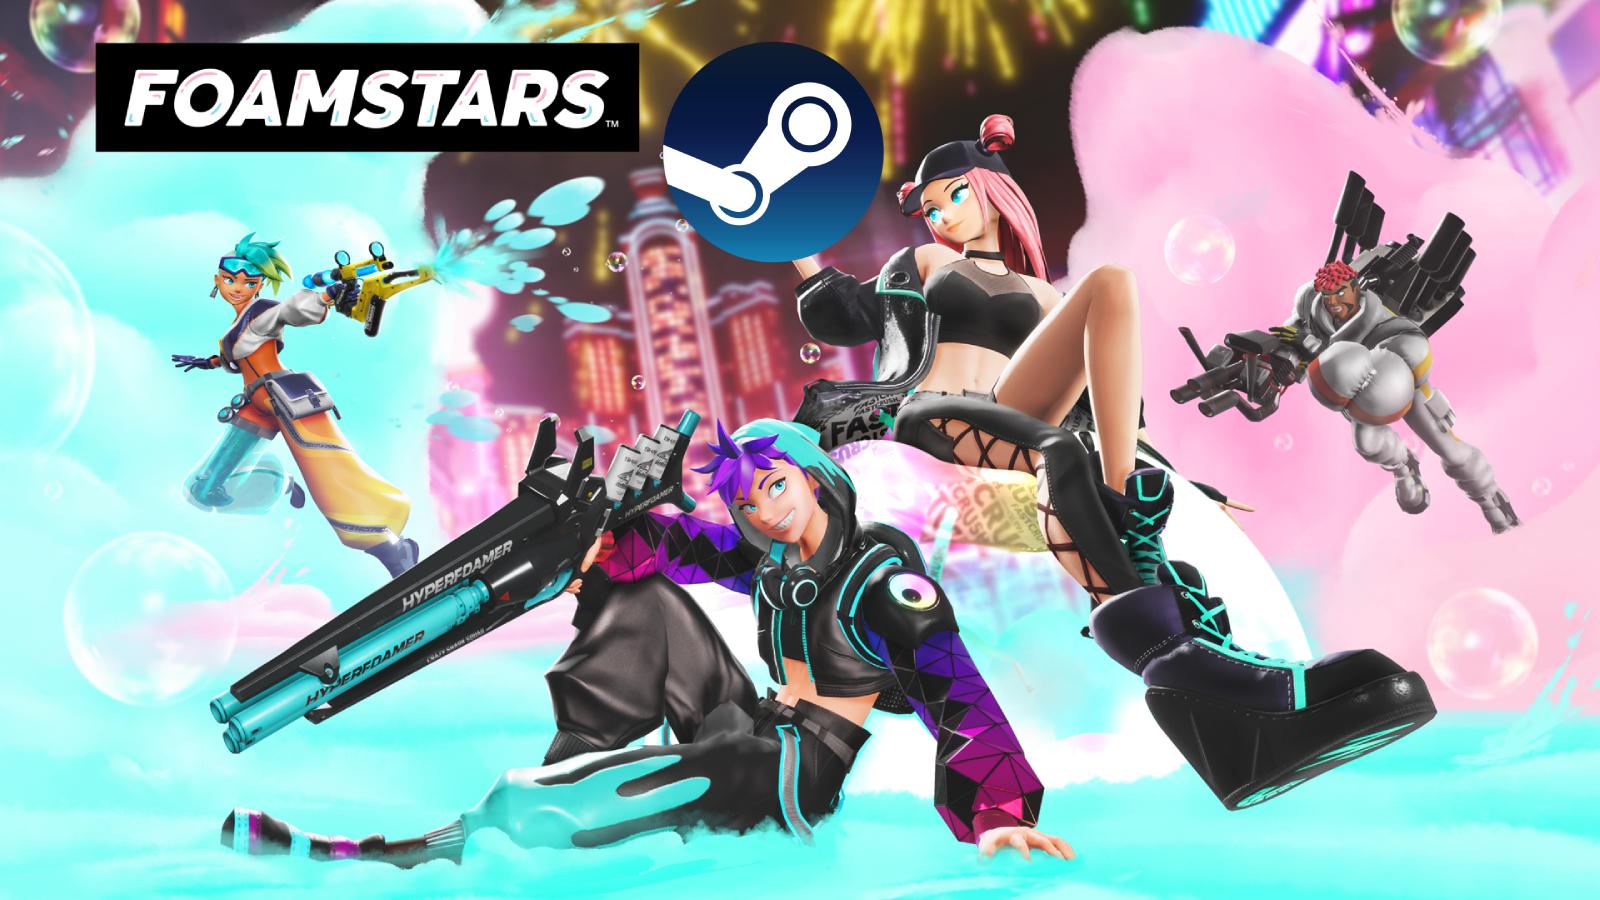 steam logo and foamstars background